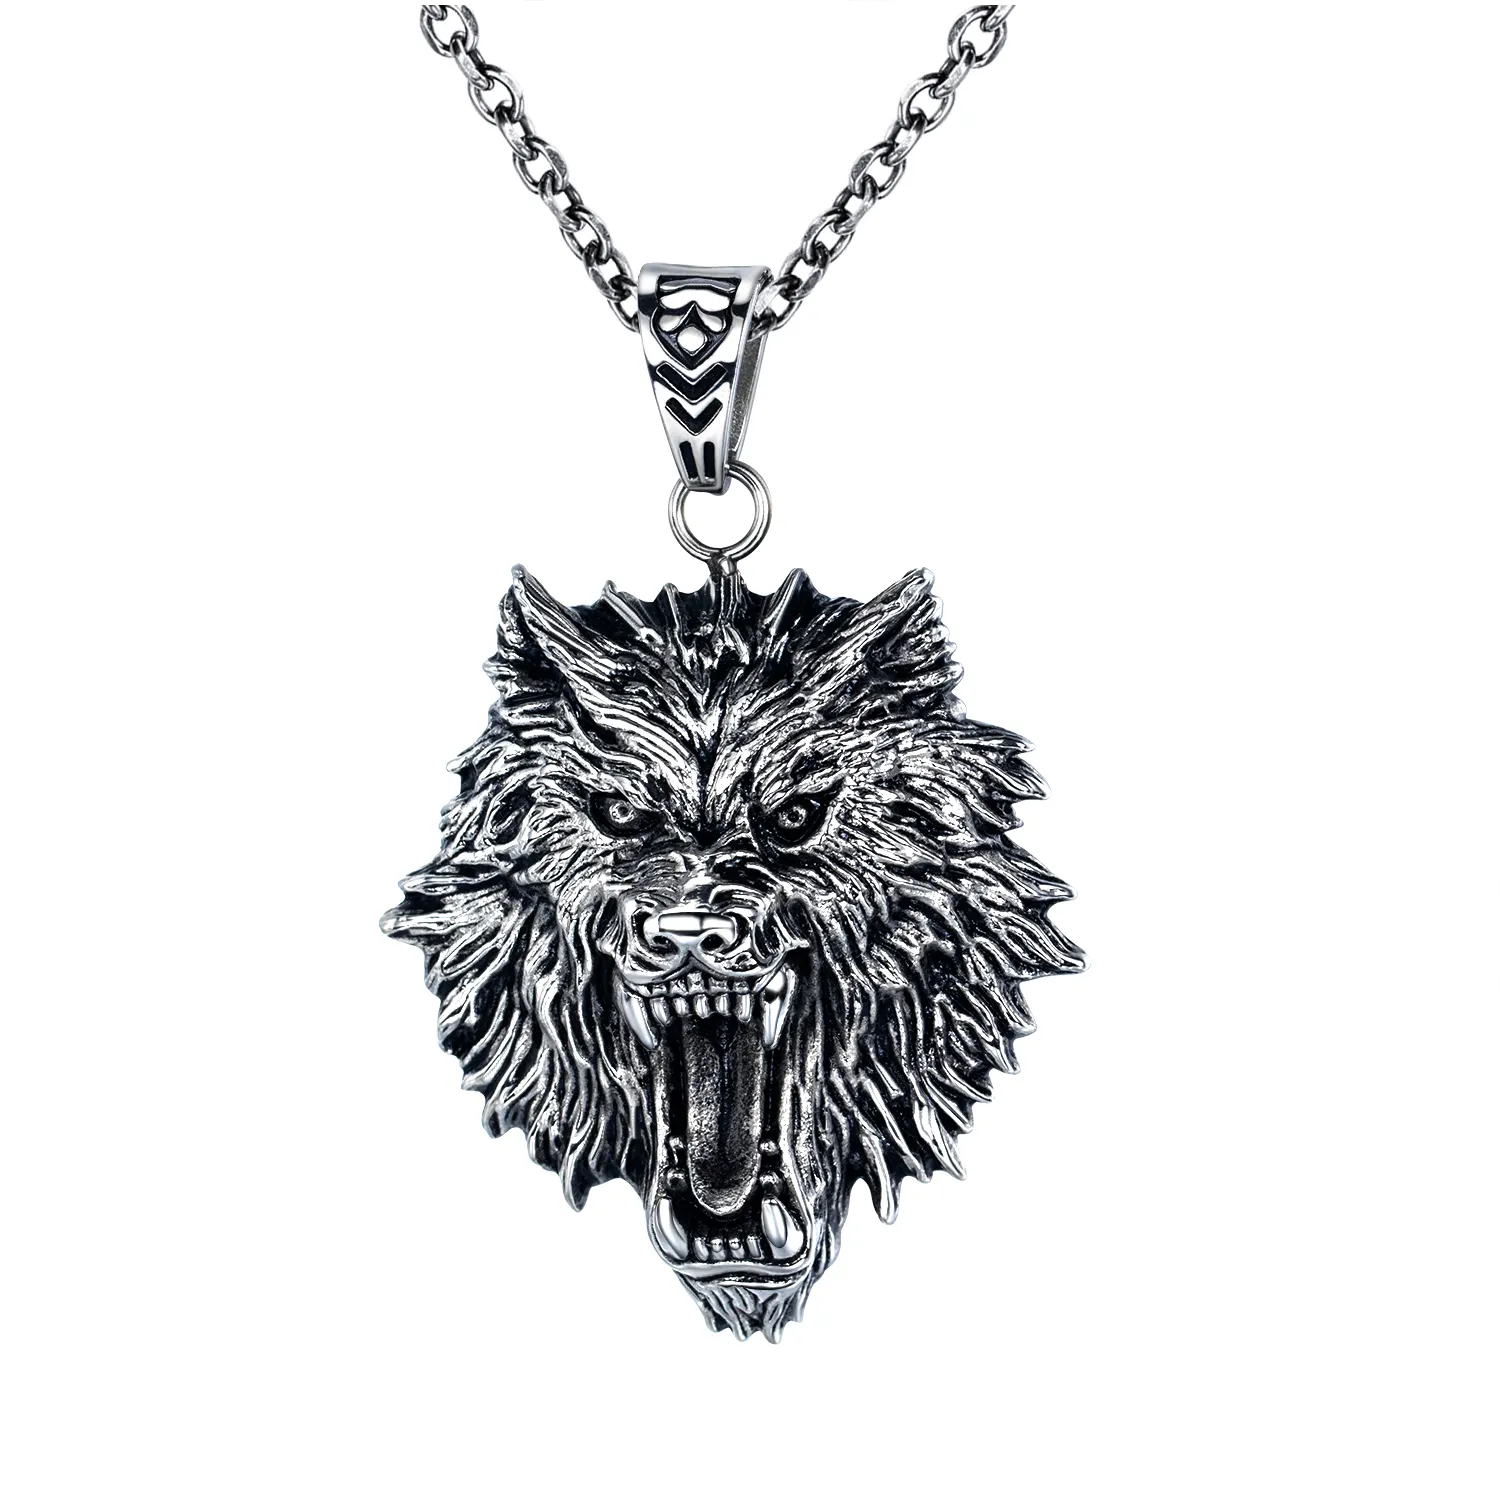 Hip Hop Men's Personality Pendant High Quality Stainless Steel Lion Head Necklace Jewelry